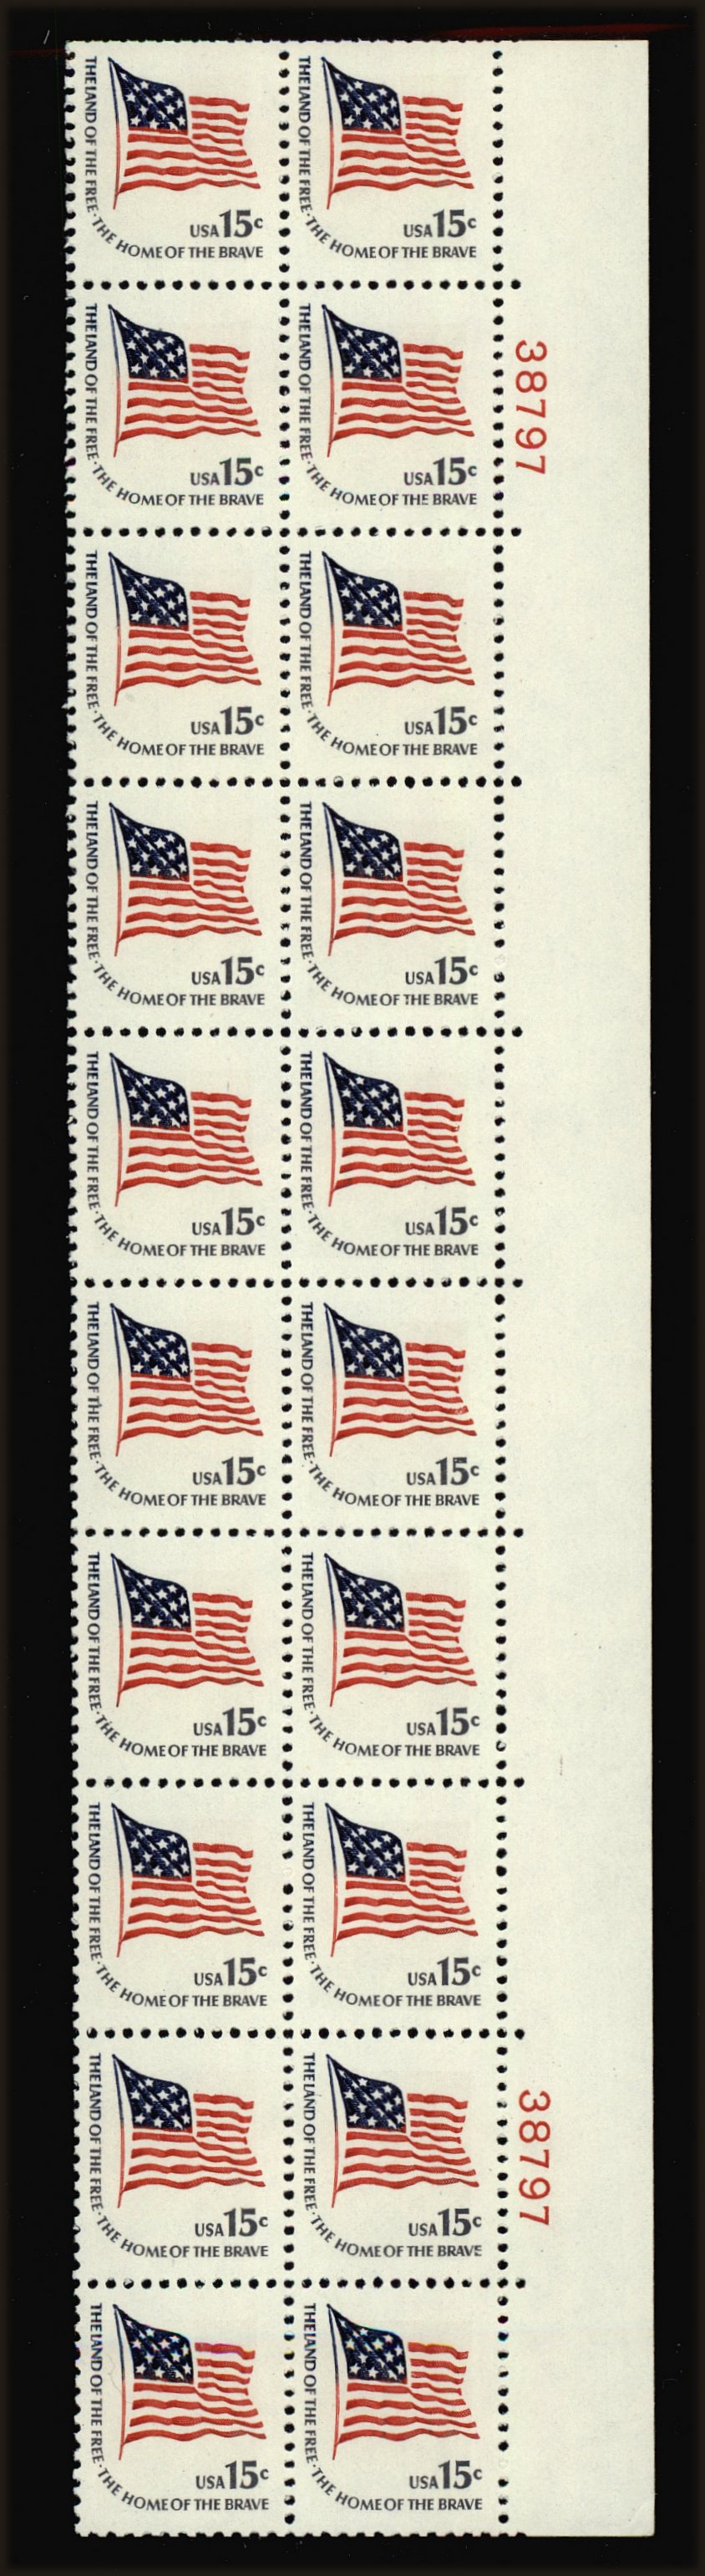 Front view of United States 1597 collectors stamp